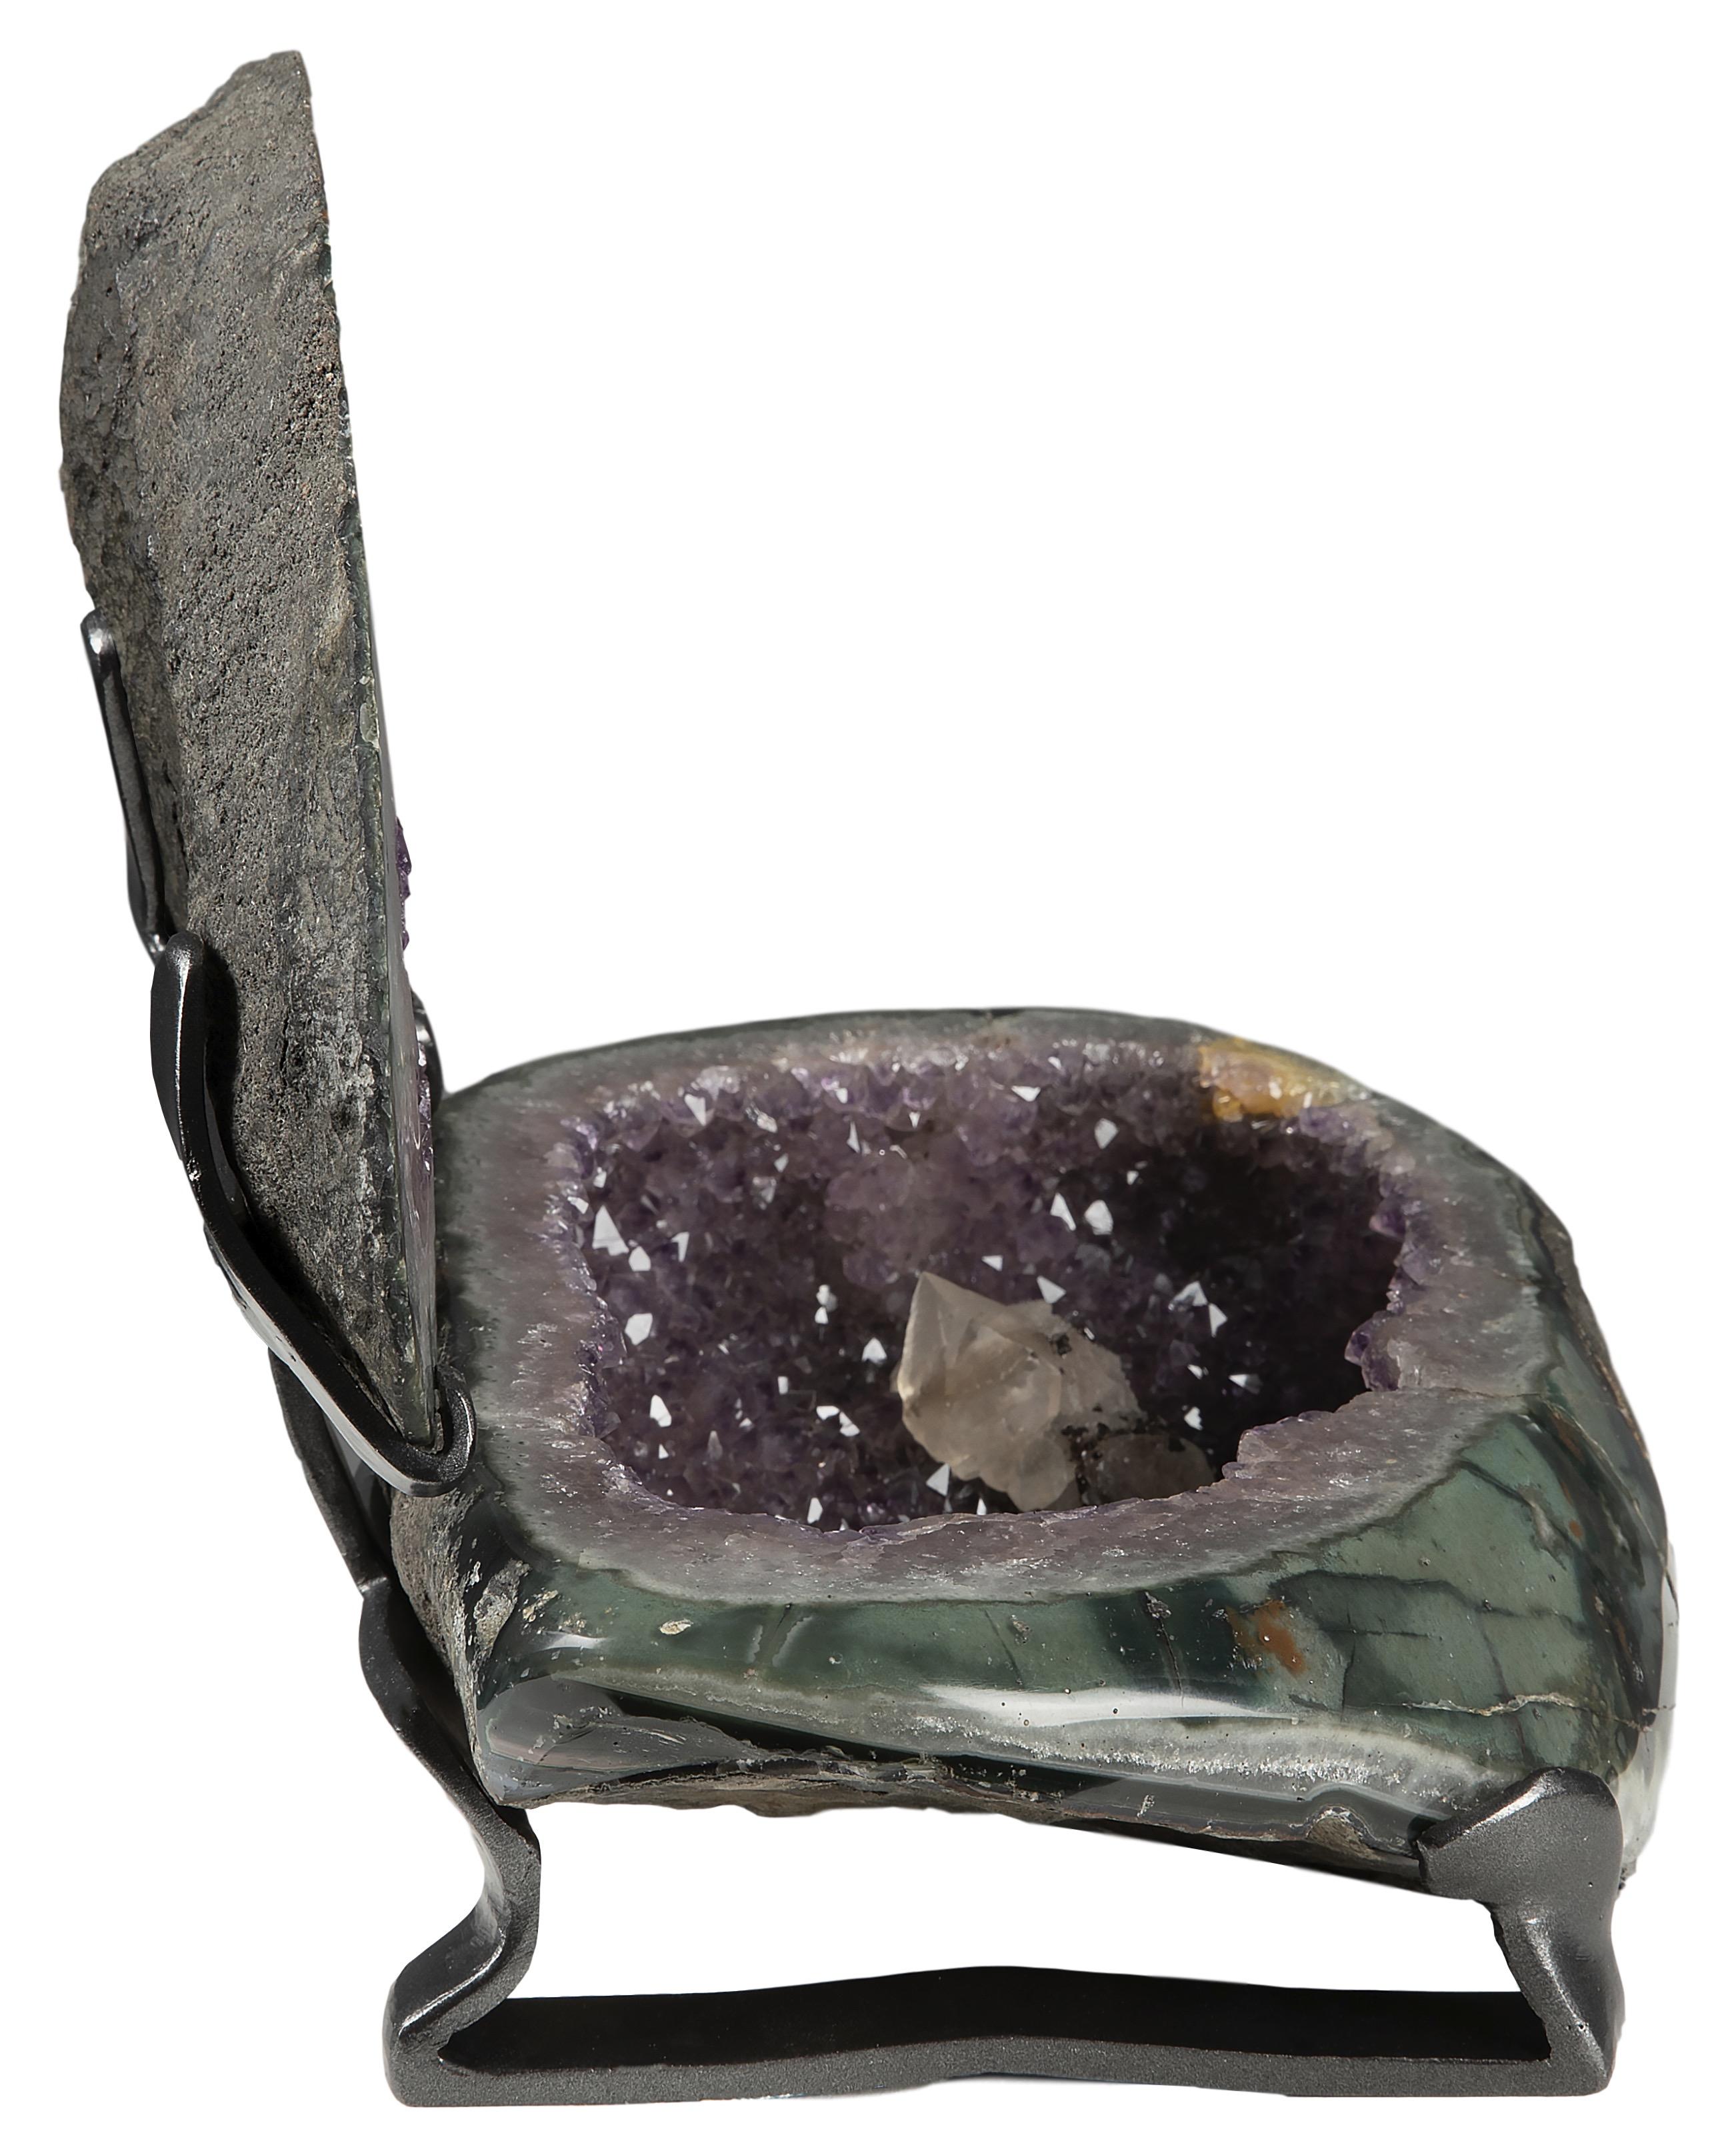 This piece celebrates the visual phenomenon of the geode in its entirety, with some parts of the sculpture being rough basalt, and others showcasing combinations of the amethyst, variation of quartz and calcite formations. From its back of rough